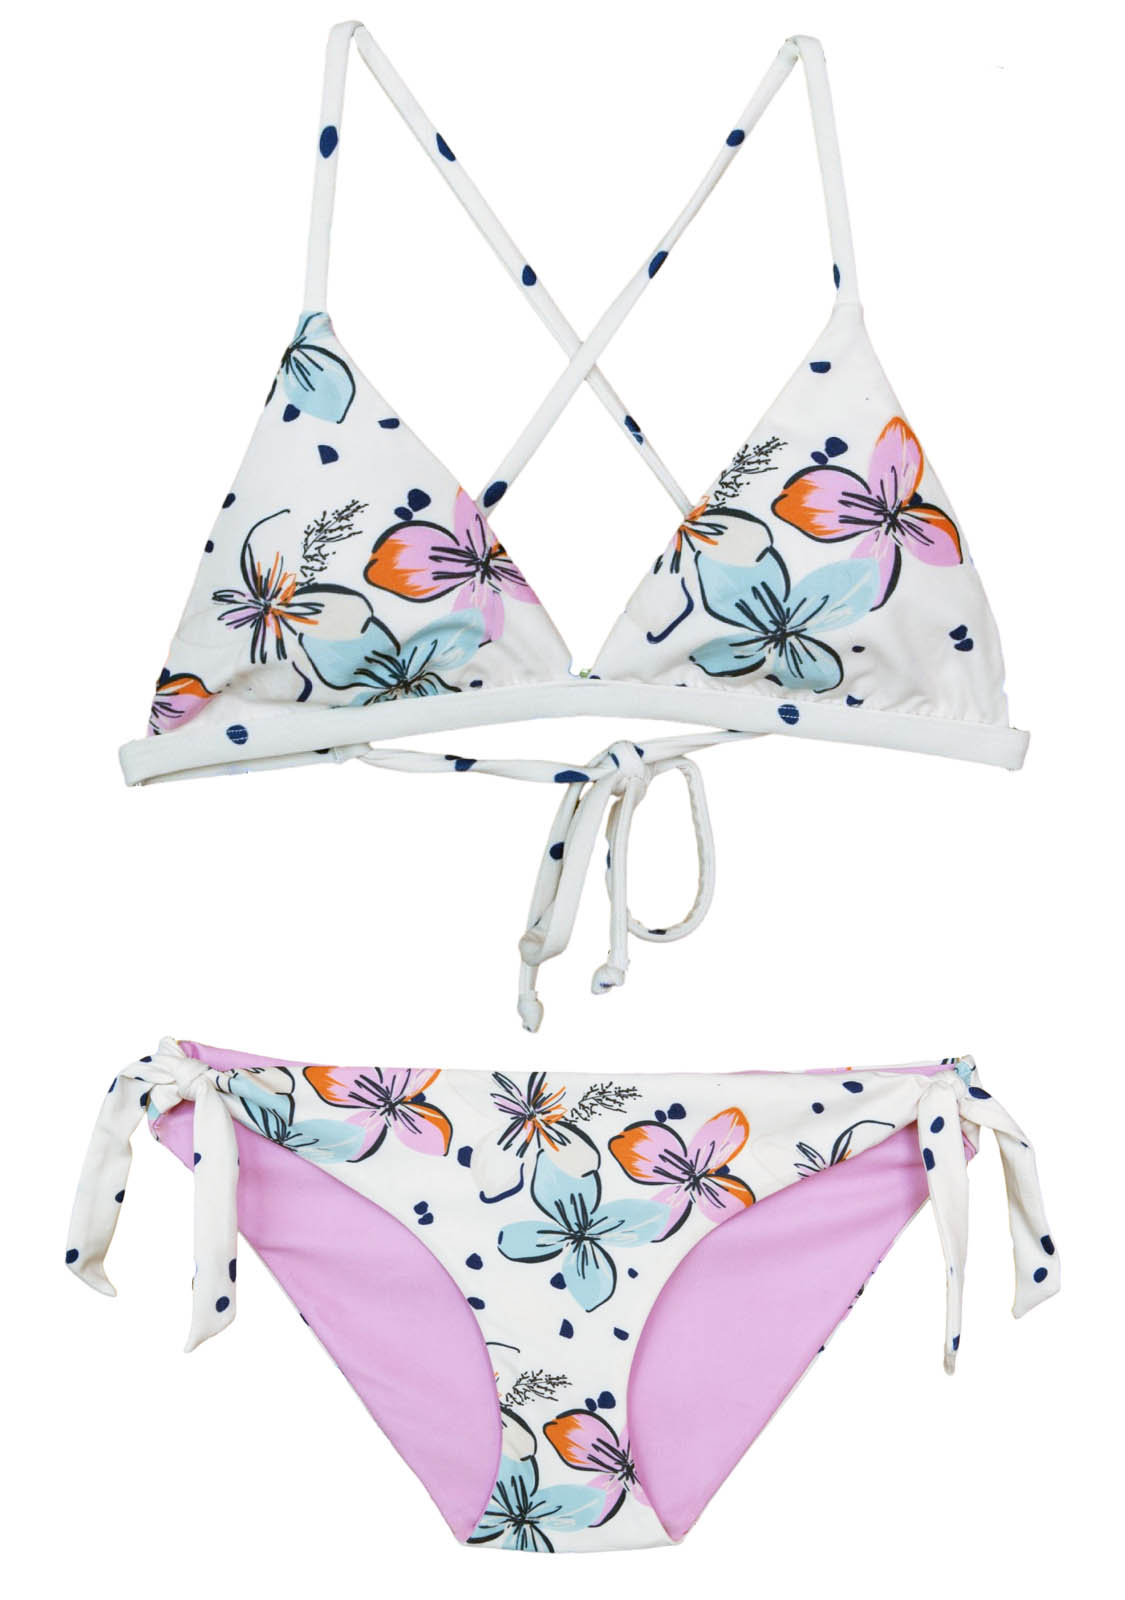 Two-piece swimsuit for pre-teens and junior girls with triangle top and modest fit bottoms in a pastel floral print